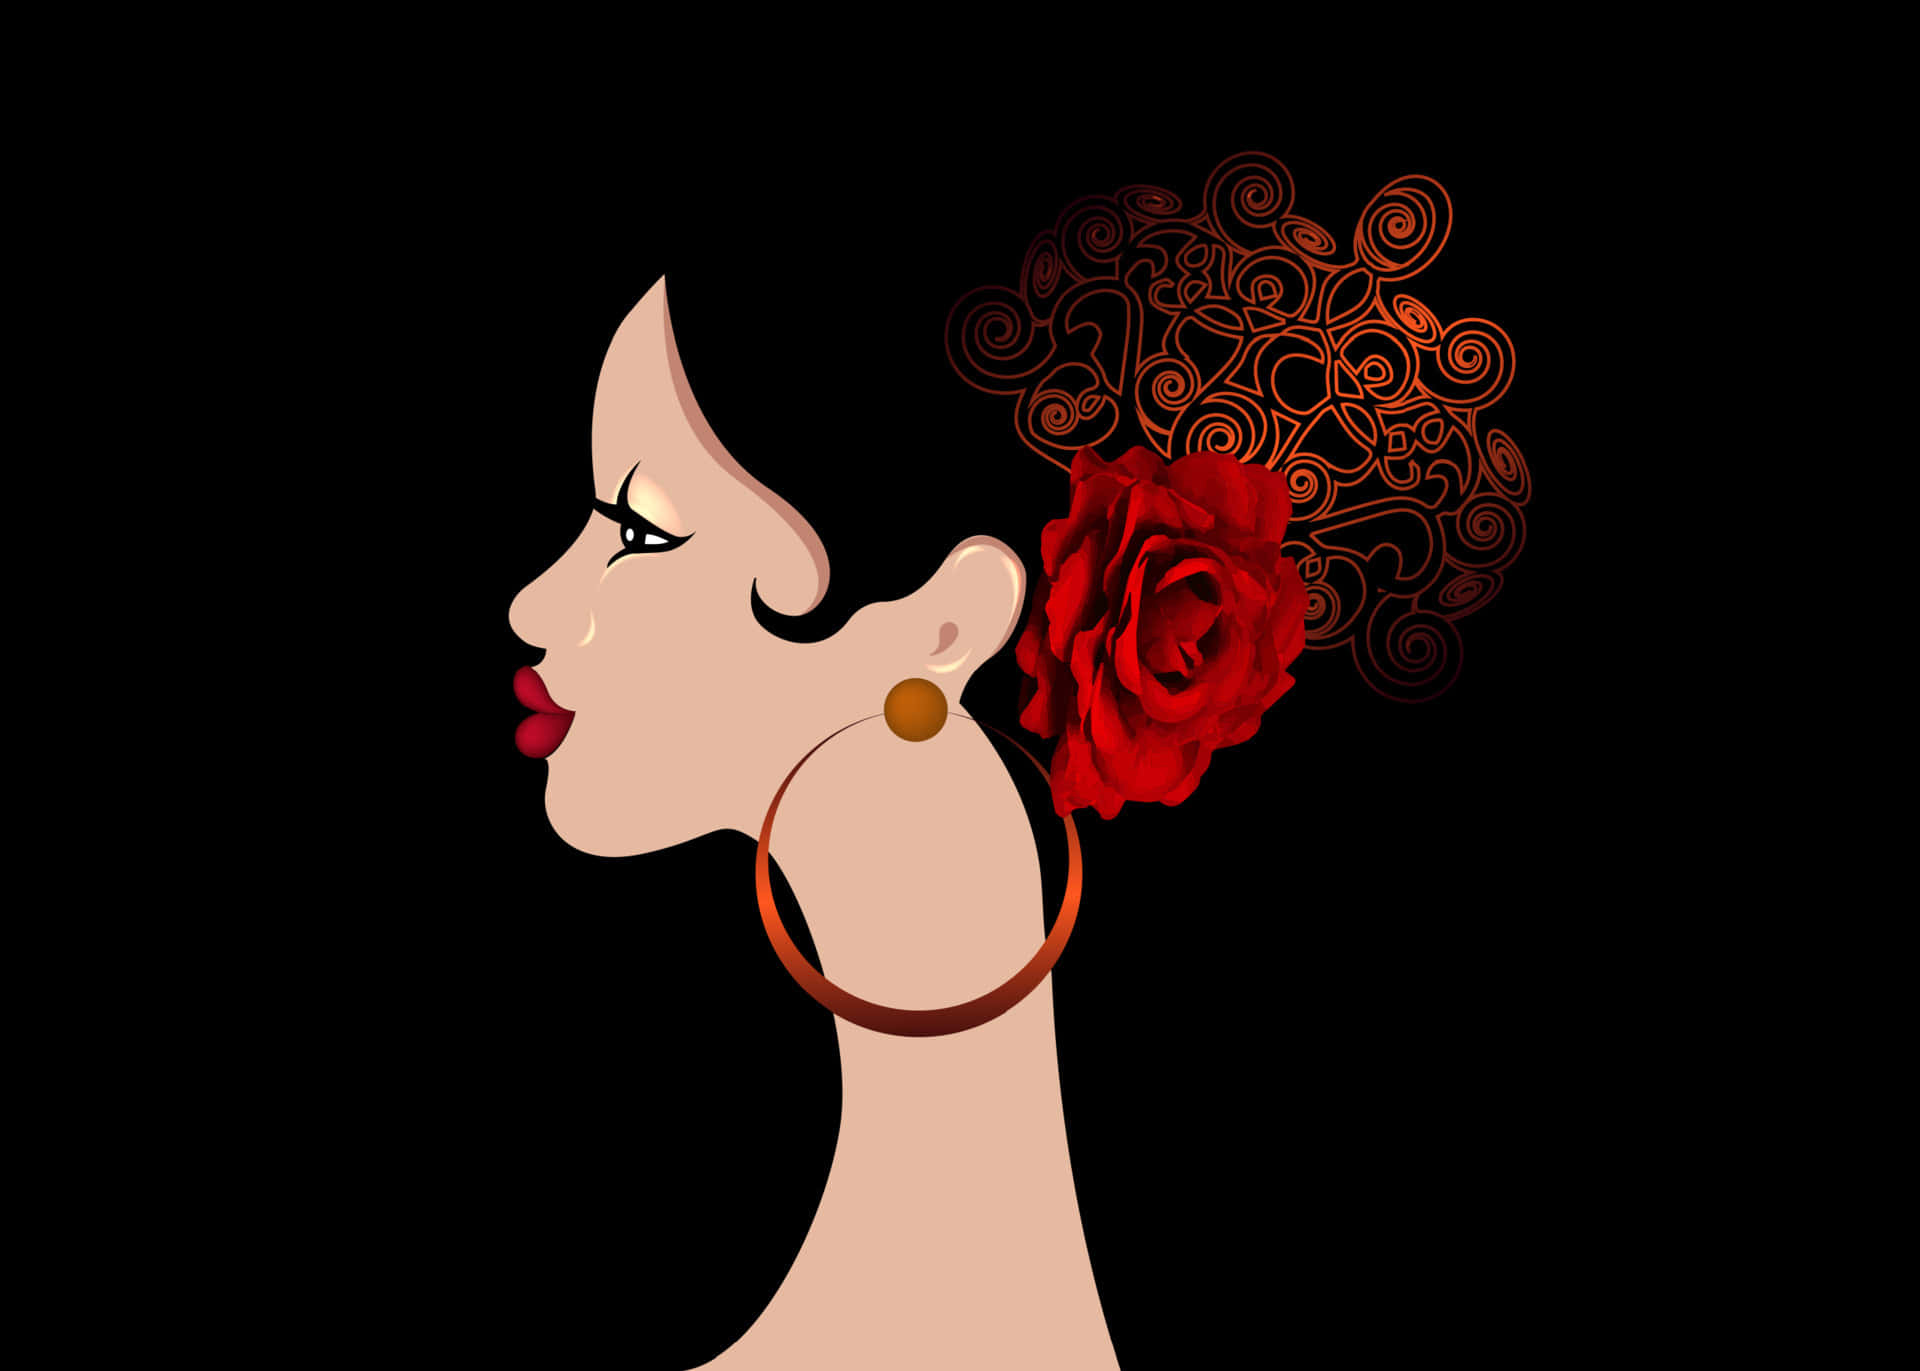 Spanish Woman In Graphic In Black Wallpaper